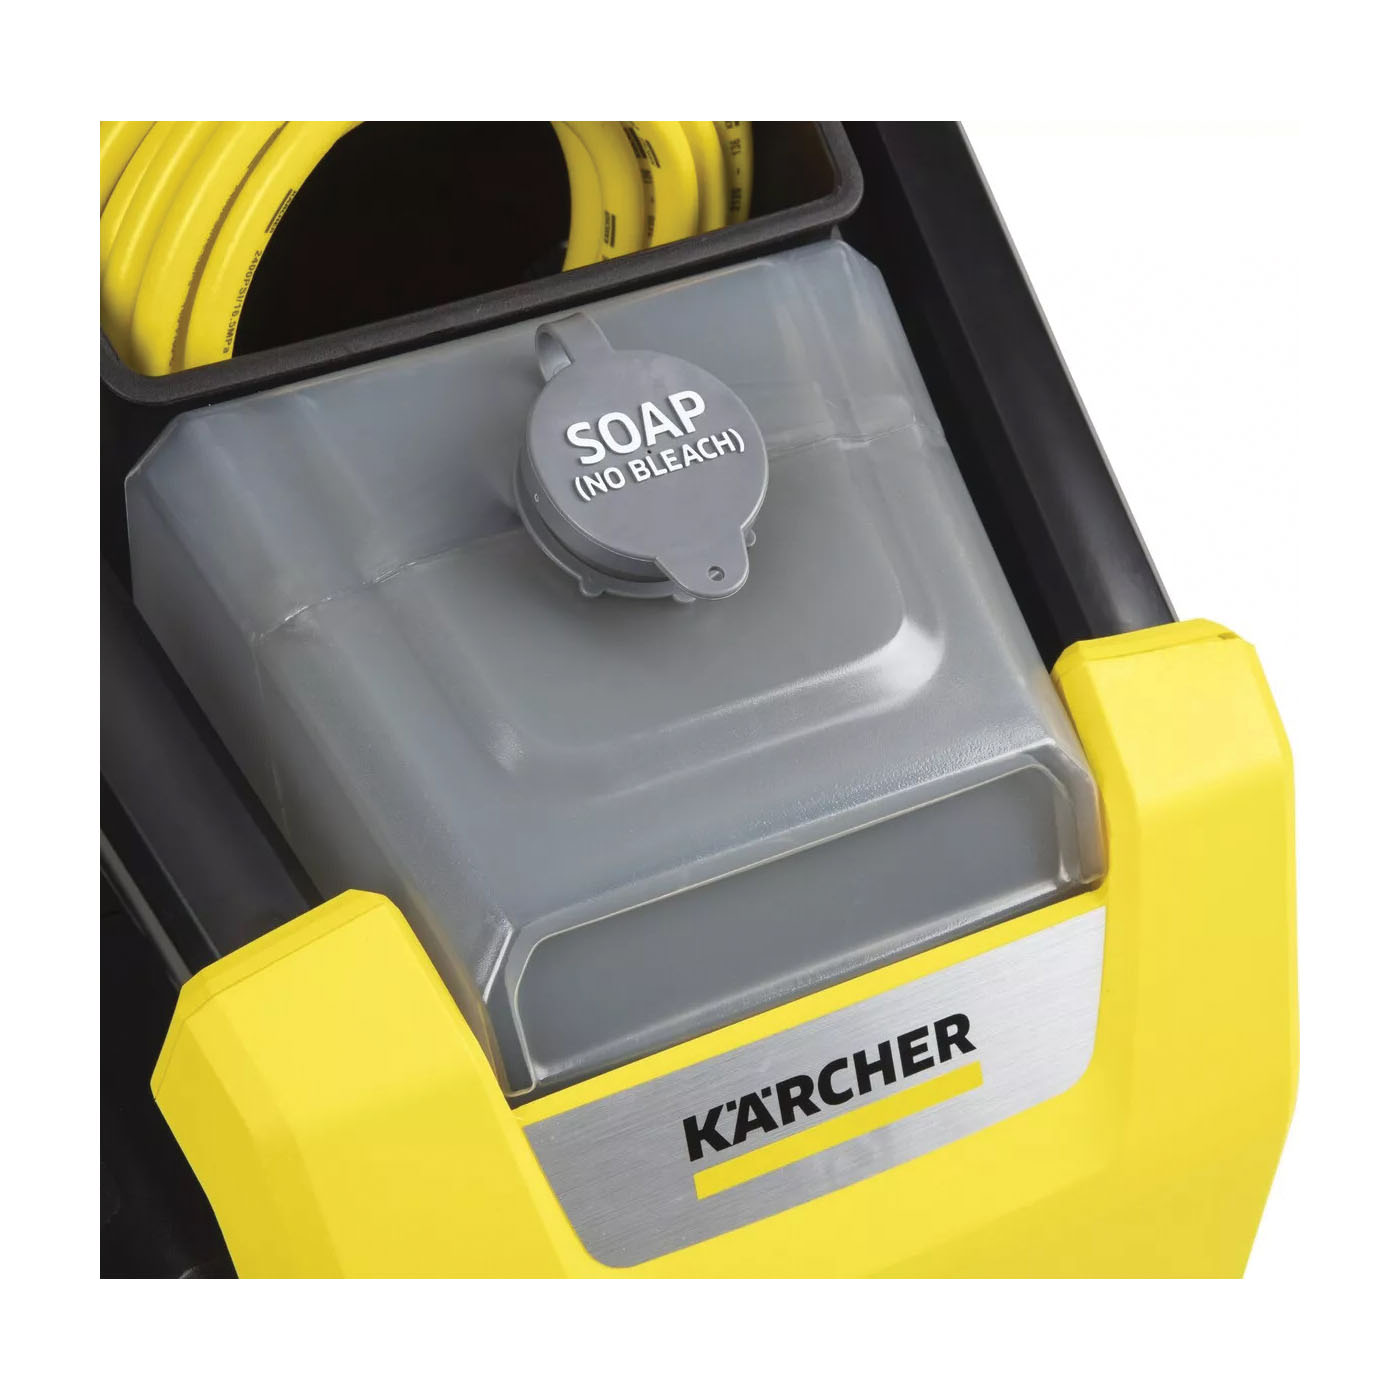 Karcher K2100PS 1.106-220.0 Pressure Washer, 1-Phase, 13 A, 120 V, Axial Cam Pump, 2100 psi Operating, 1.2 gpm - 4